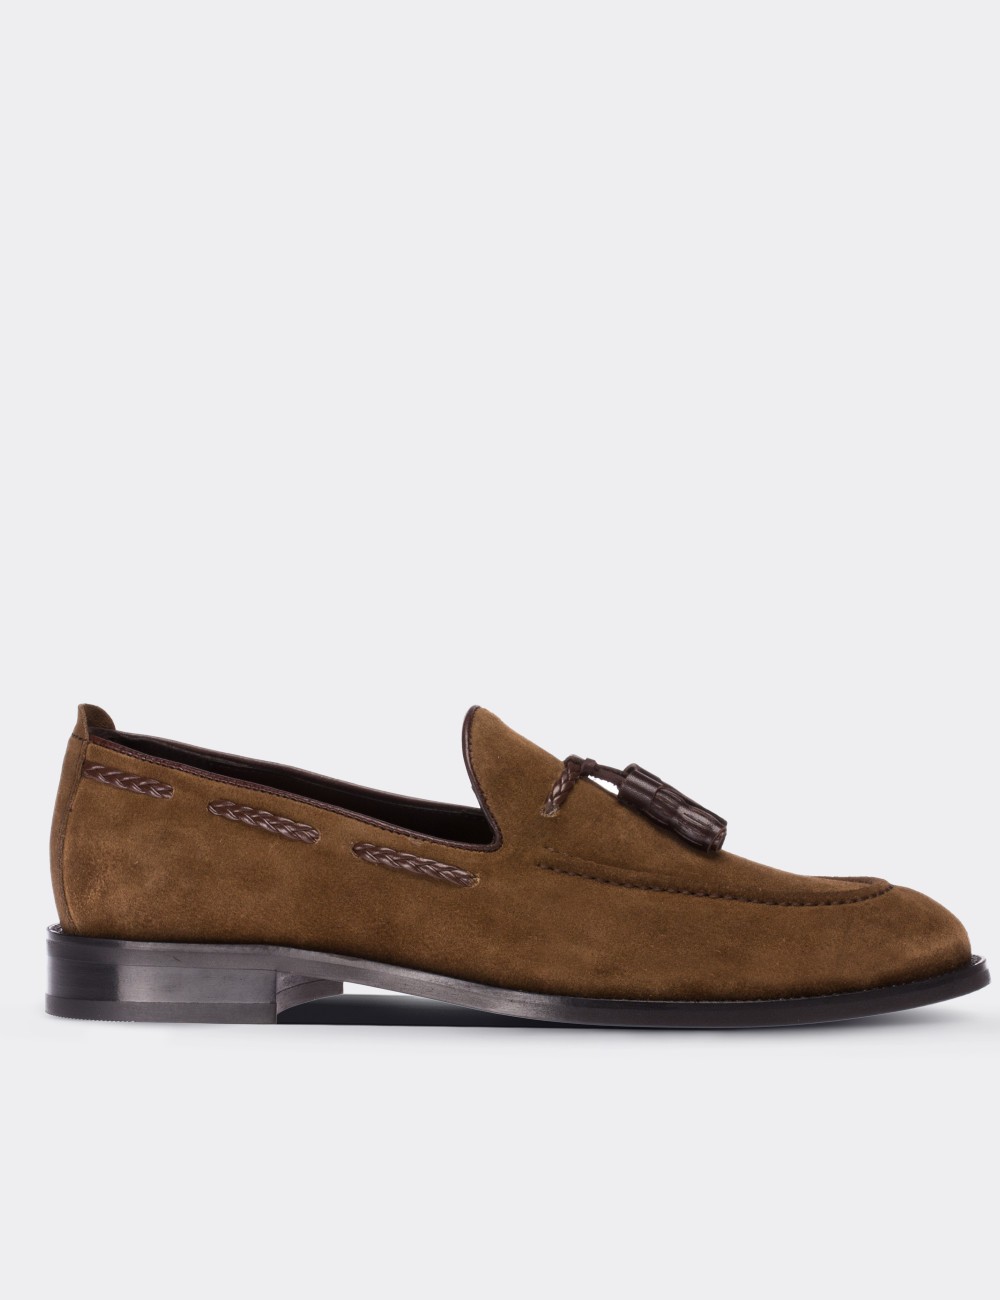 Tan Suede Leather Loafers - 01642MTBAC01